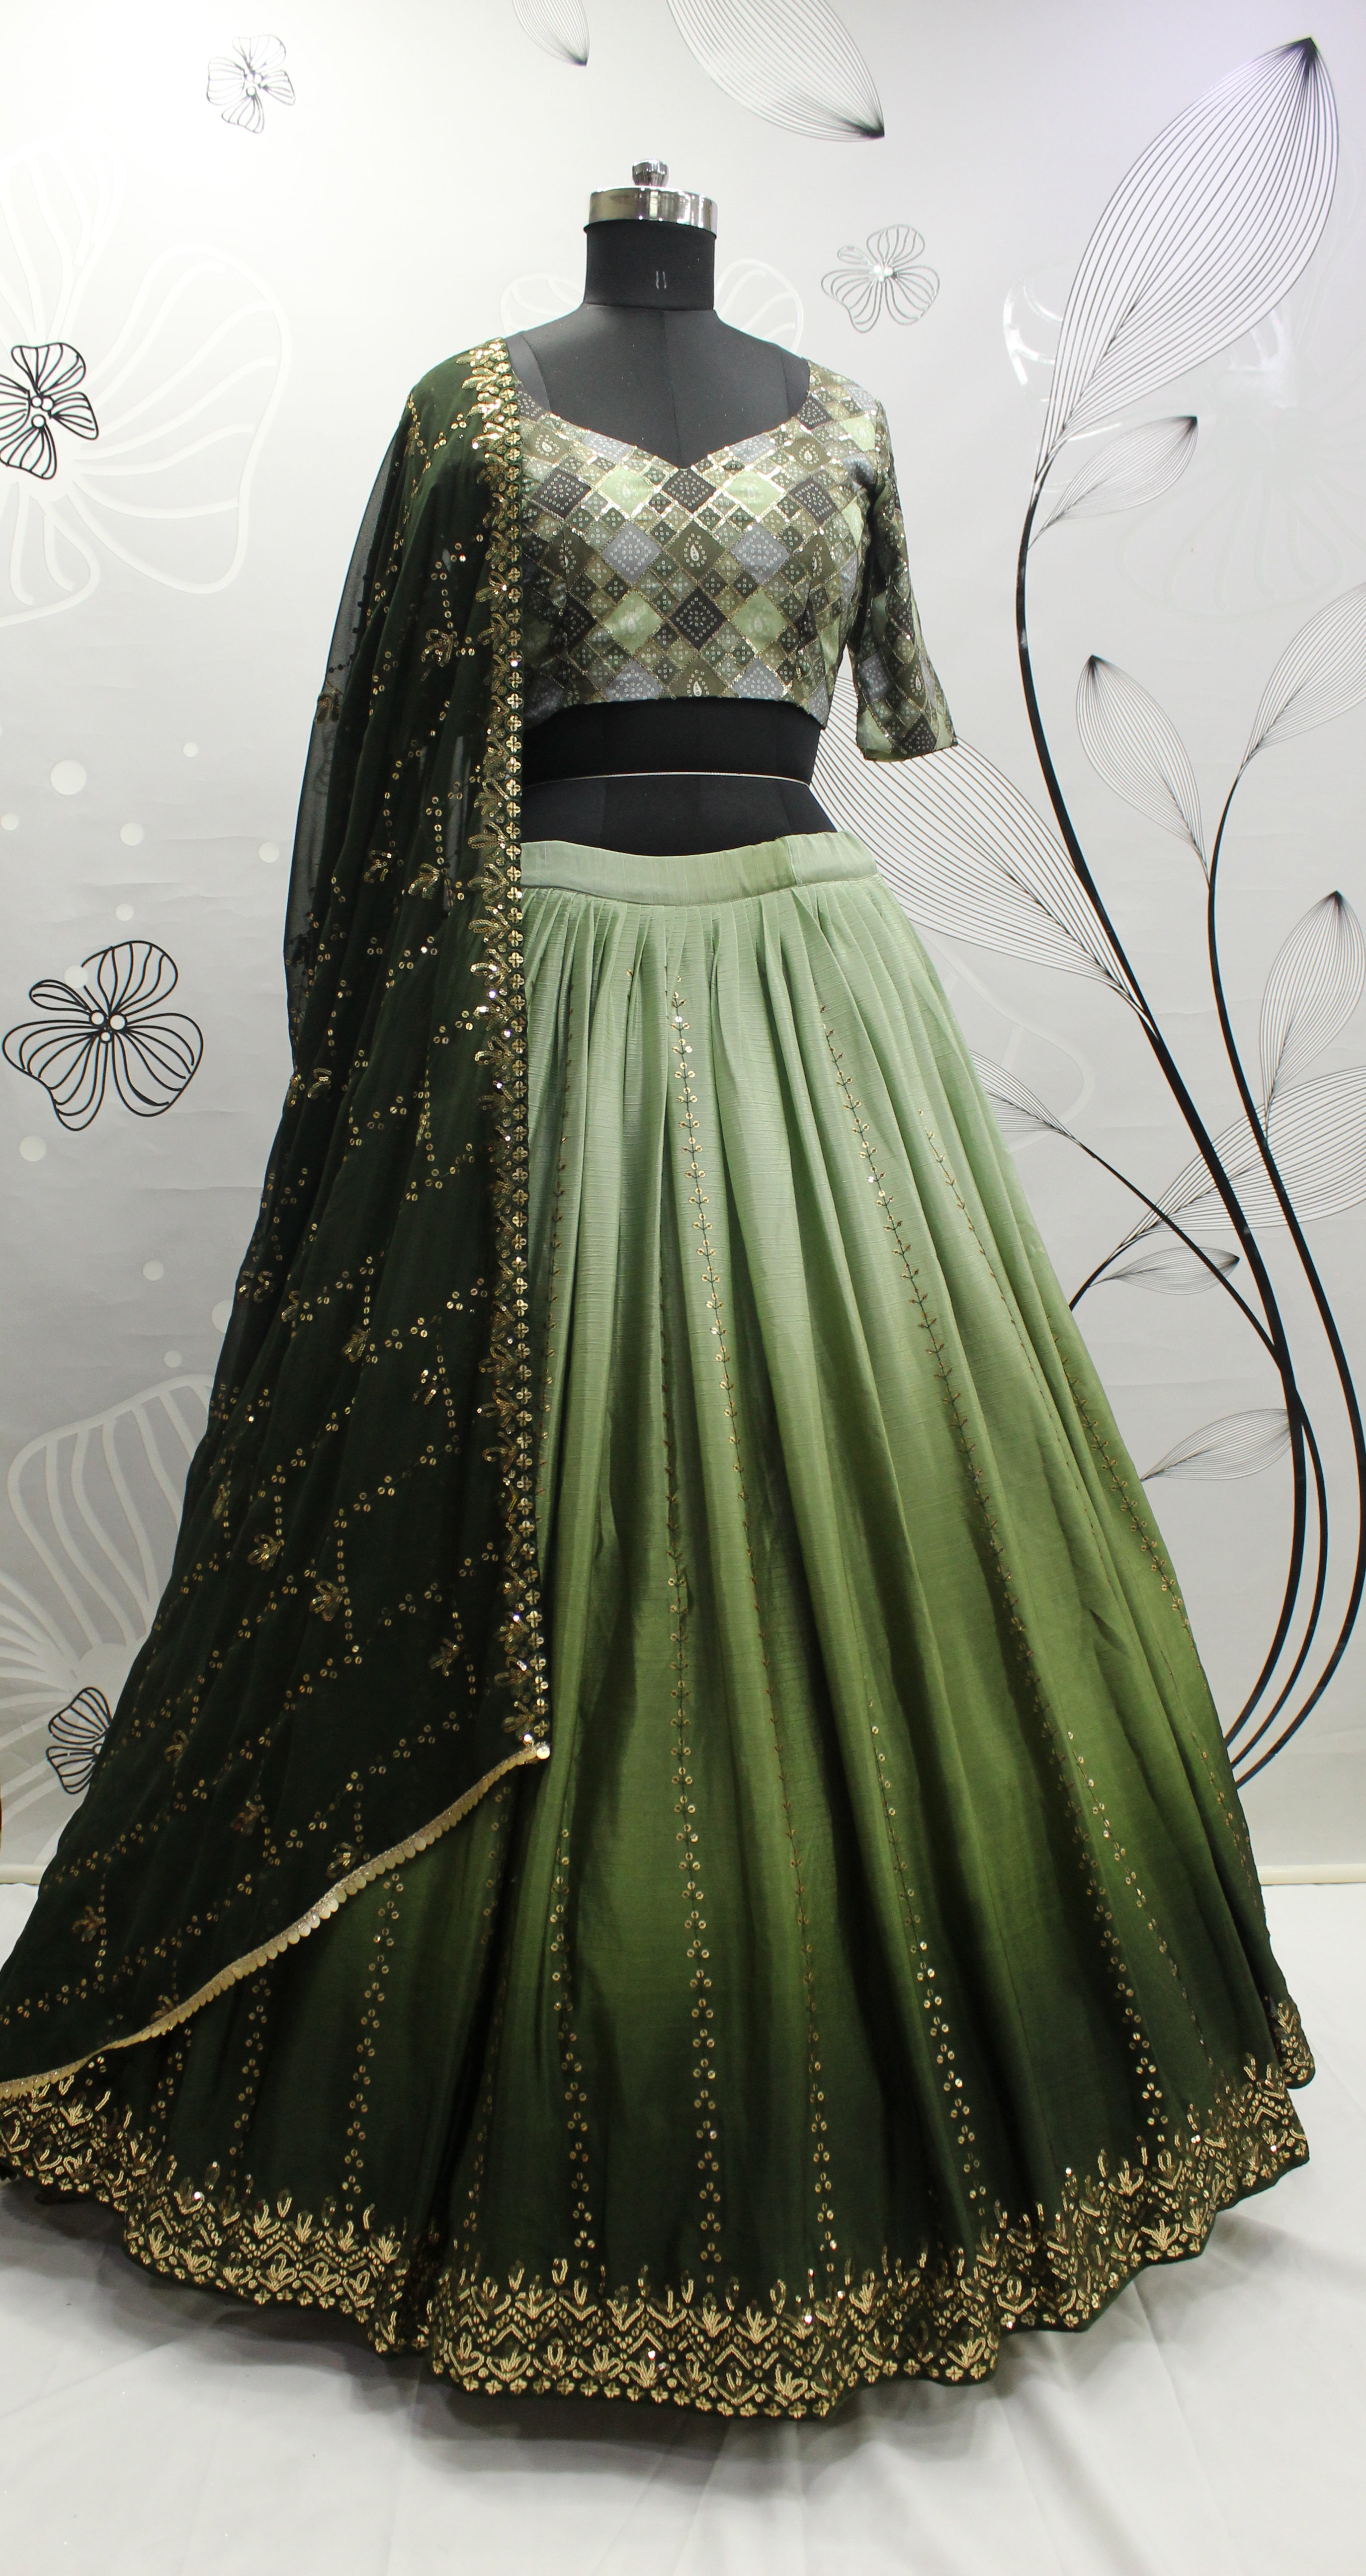 Exquisite Bridal Lehengas in the UK: Explore Trending Styles at Our Store